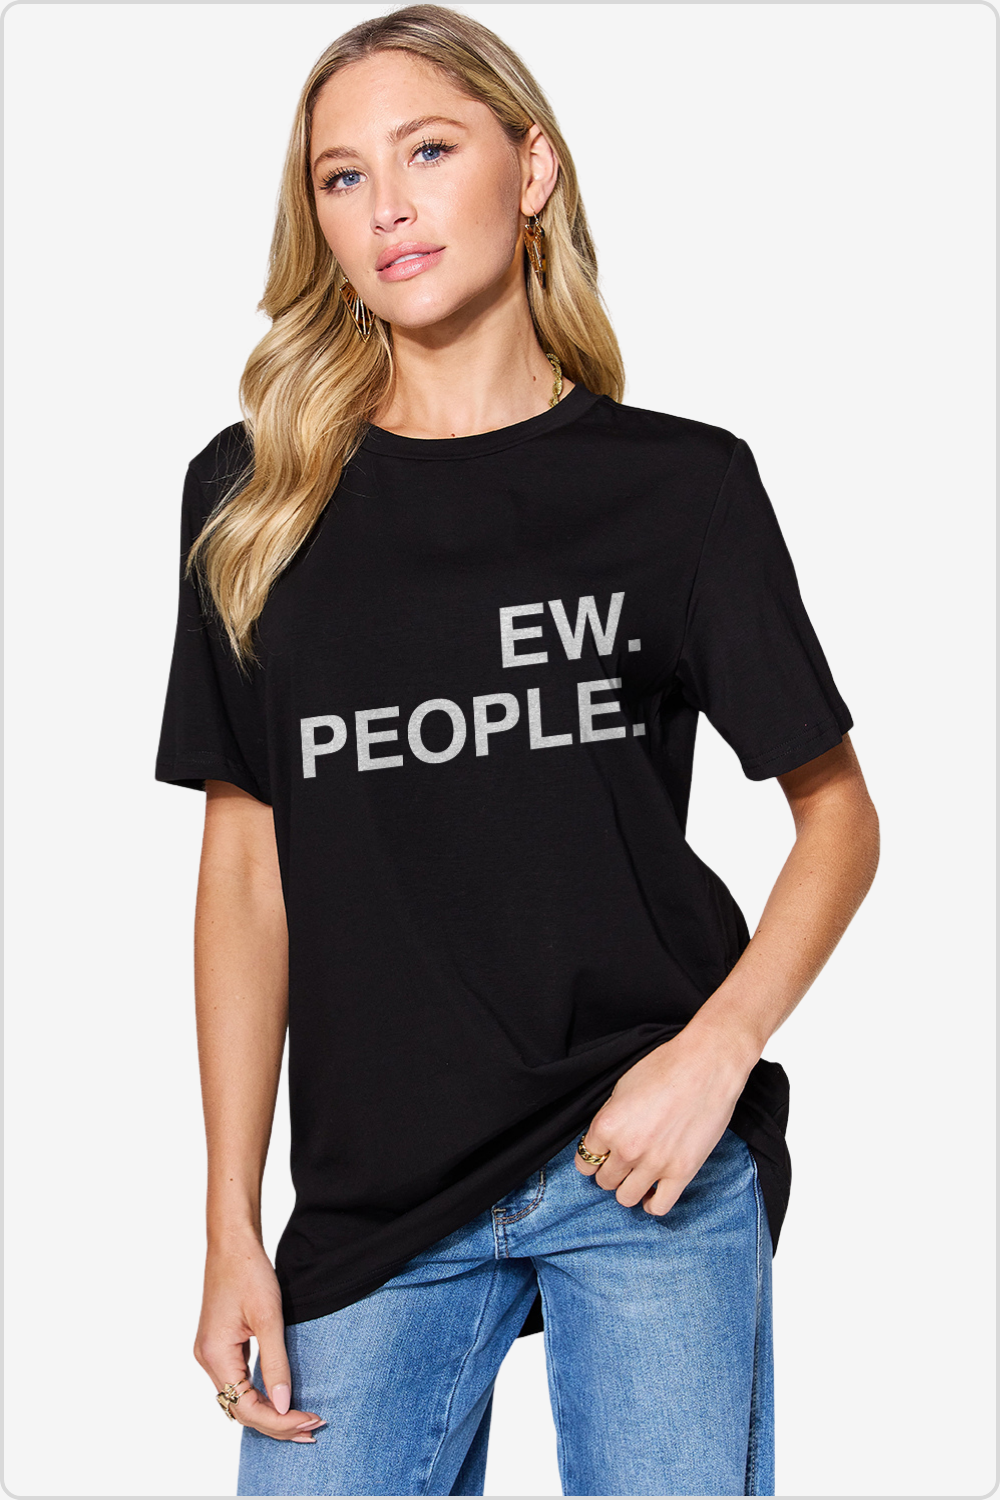 Show your humorous side with the 'EW. PEOPLE' graphic tee, front view